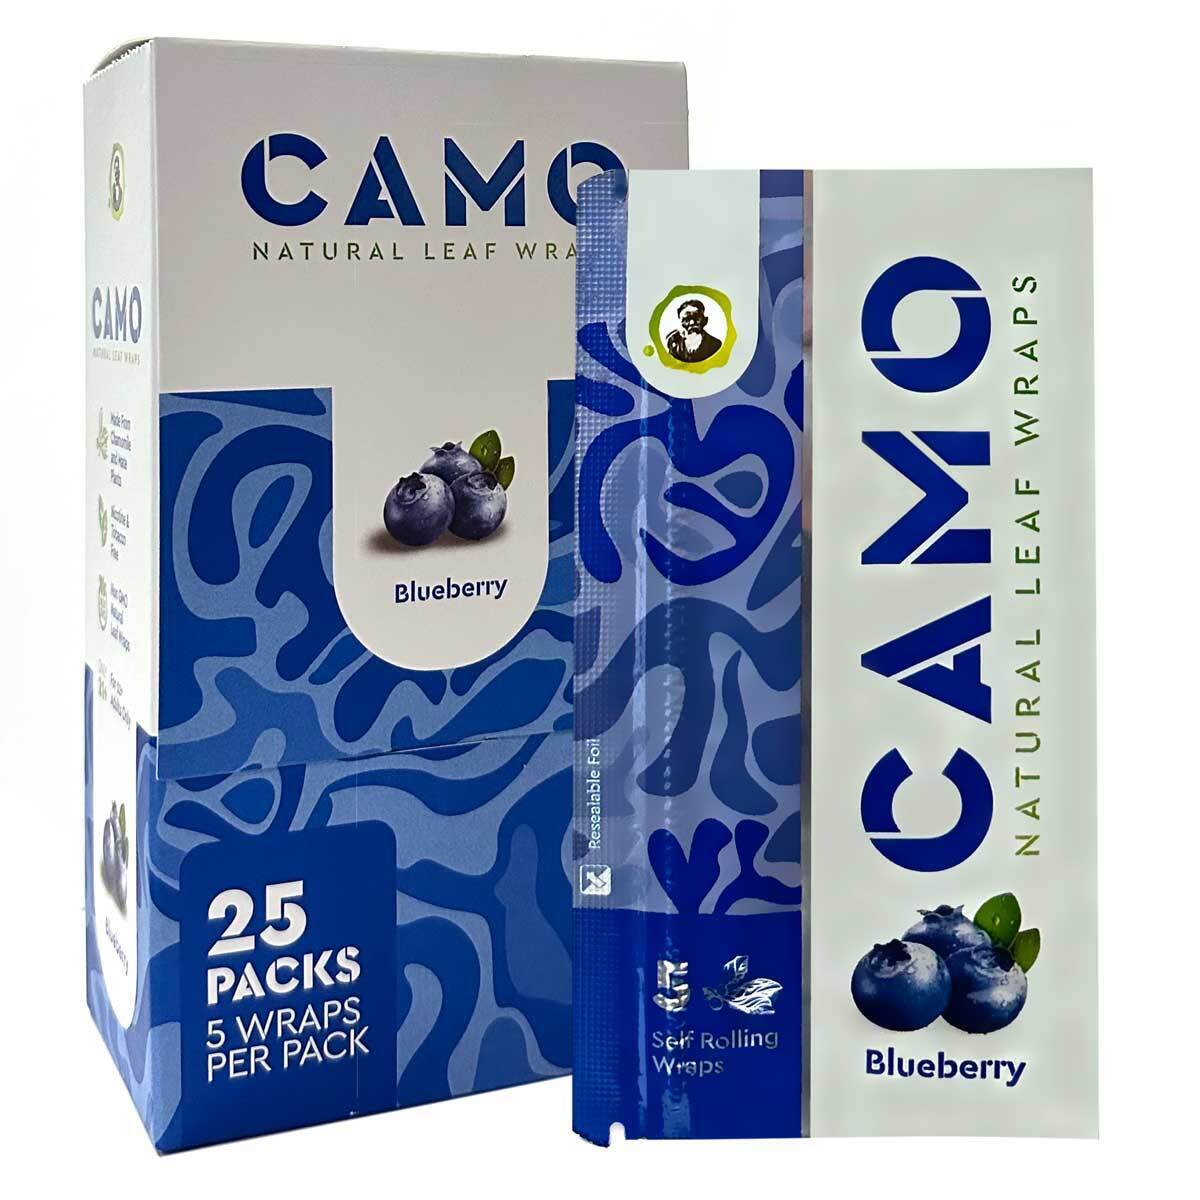 Camo Natural Leaf Wraps BLUEBERRY Self Rolling Herbal Wraps 25 Packs, Full Box